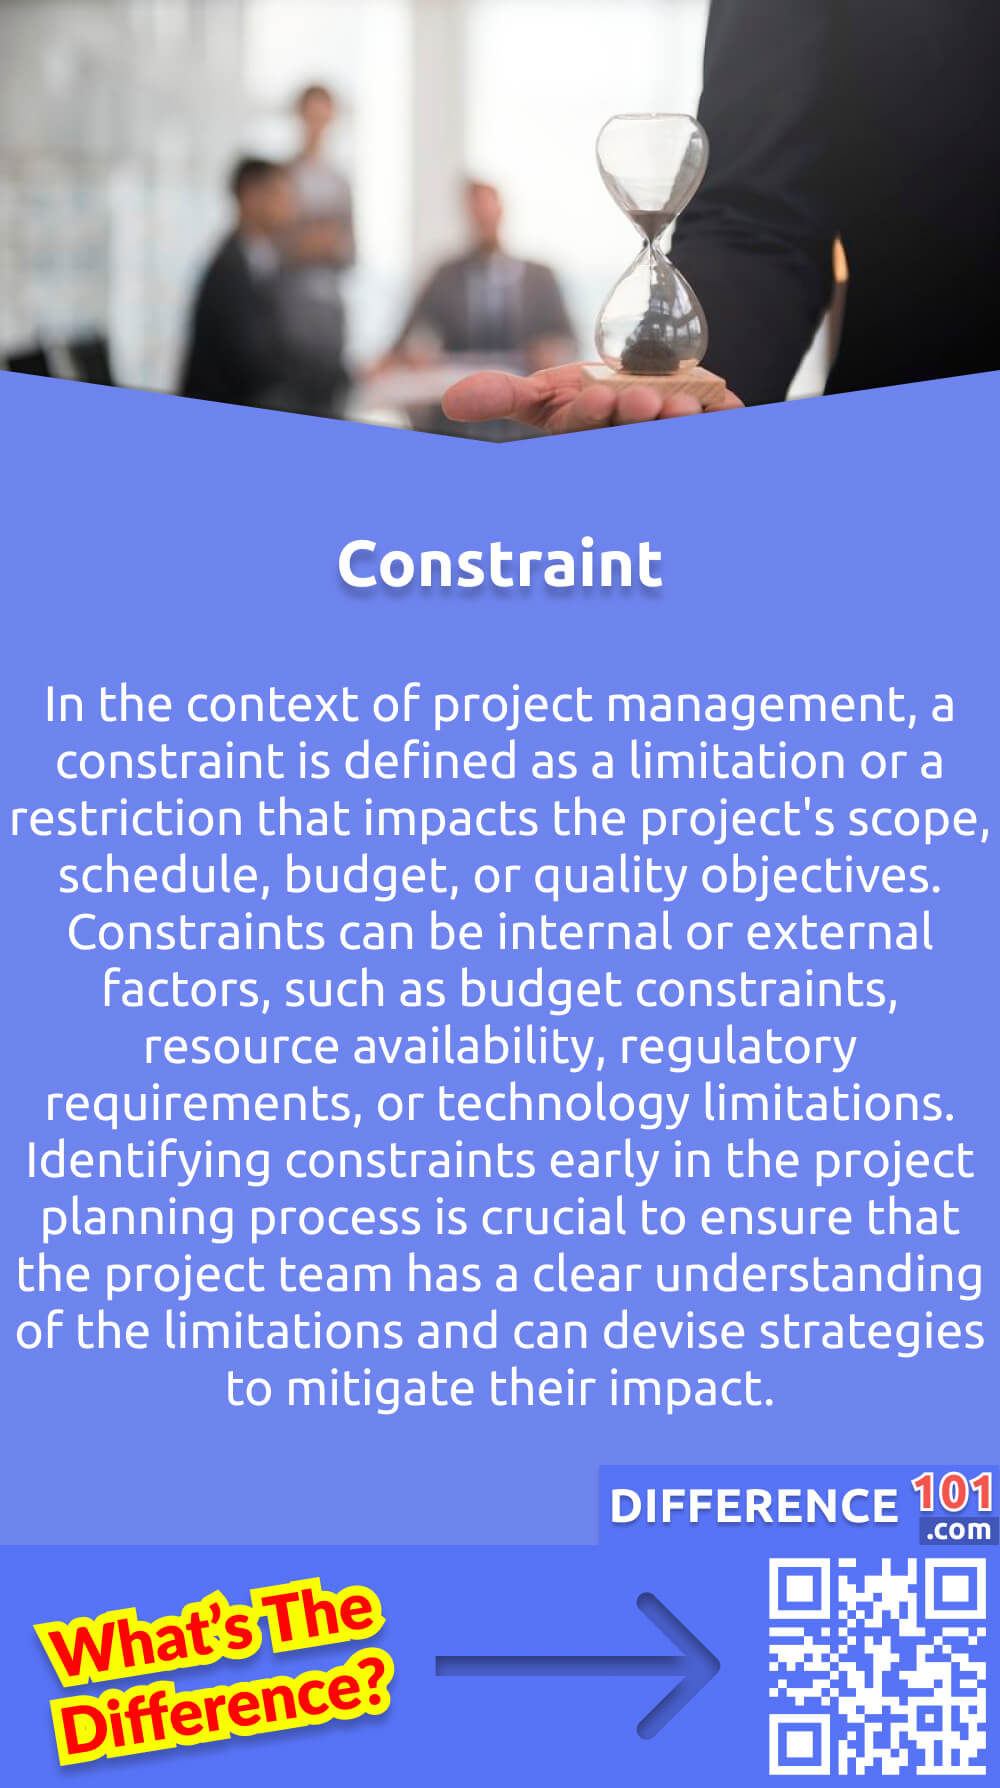 What Is Constraint? In the context of project management, a constraint is defined as a limitation or a restriction that impacts the project's scope, schedule, budget, or quality objectives. Constraints can be internal or external factors, such as budget constraints, resource availability, regulatory requirements, or technology limitations. Identifying constraints early in the project planning process is crucial to ensure that the project team has a clear understanding of the limitations and can devise strategies to mitigate their impact. Effective project managers are adept at managing constraints and balancing competing demands to deliver a successful project within the defined limitations. Recognizing and addressing constraints is essential to ensuring project success and meeting stakeholder expectations.